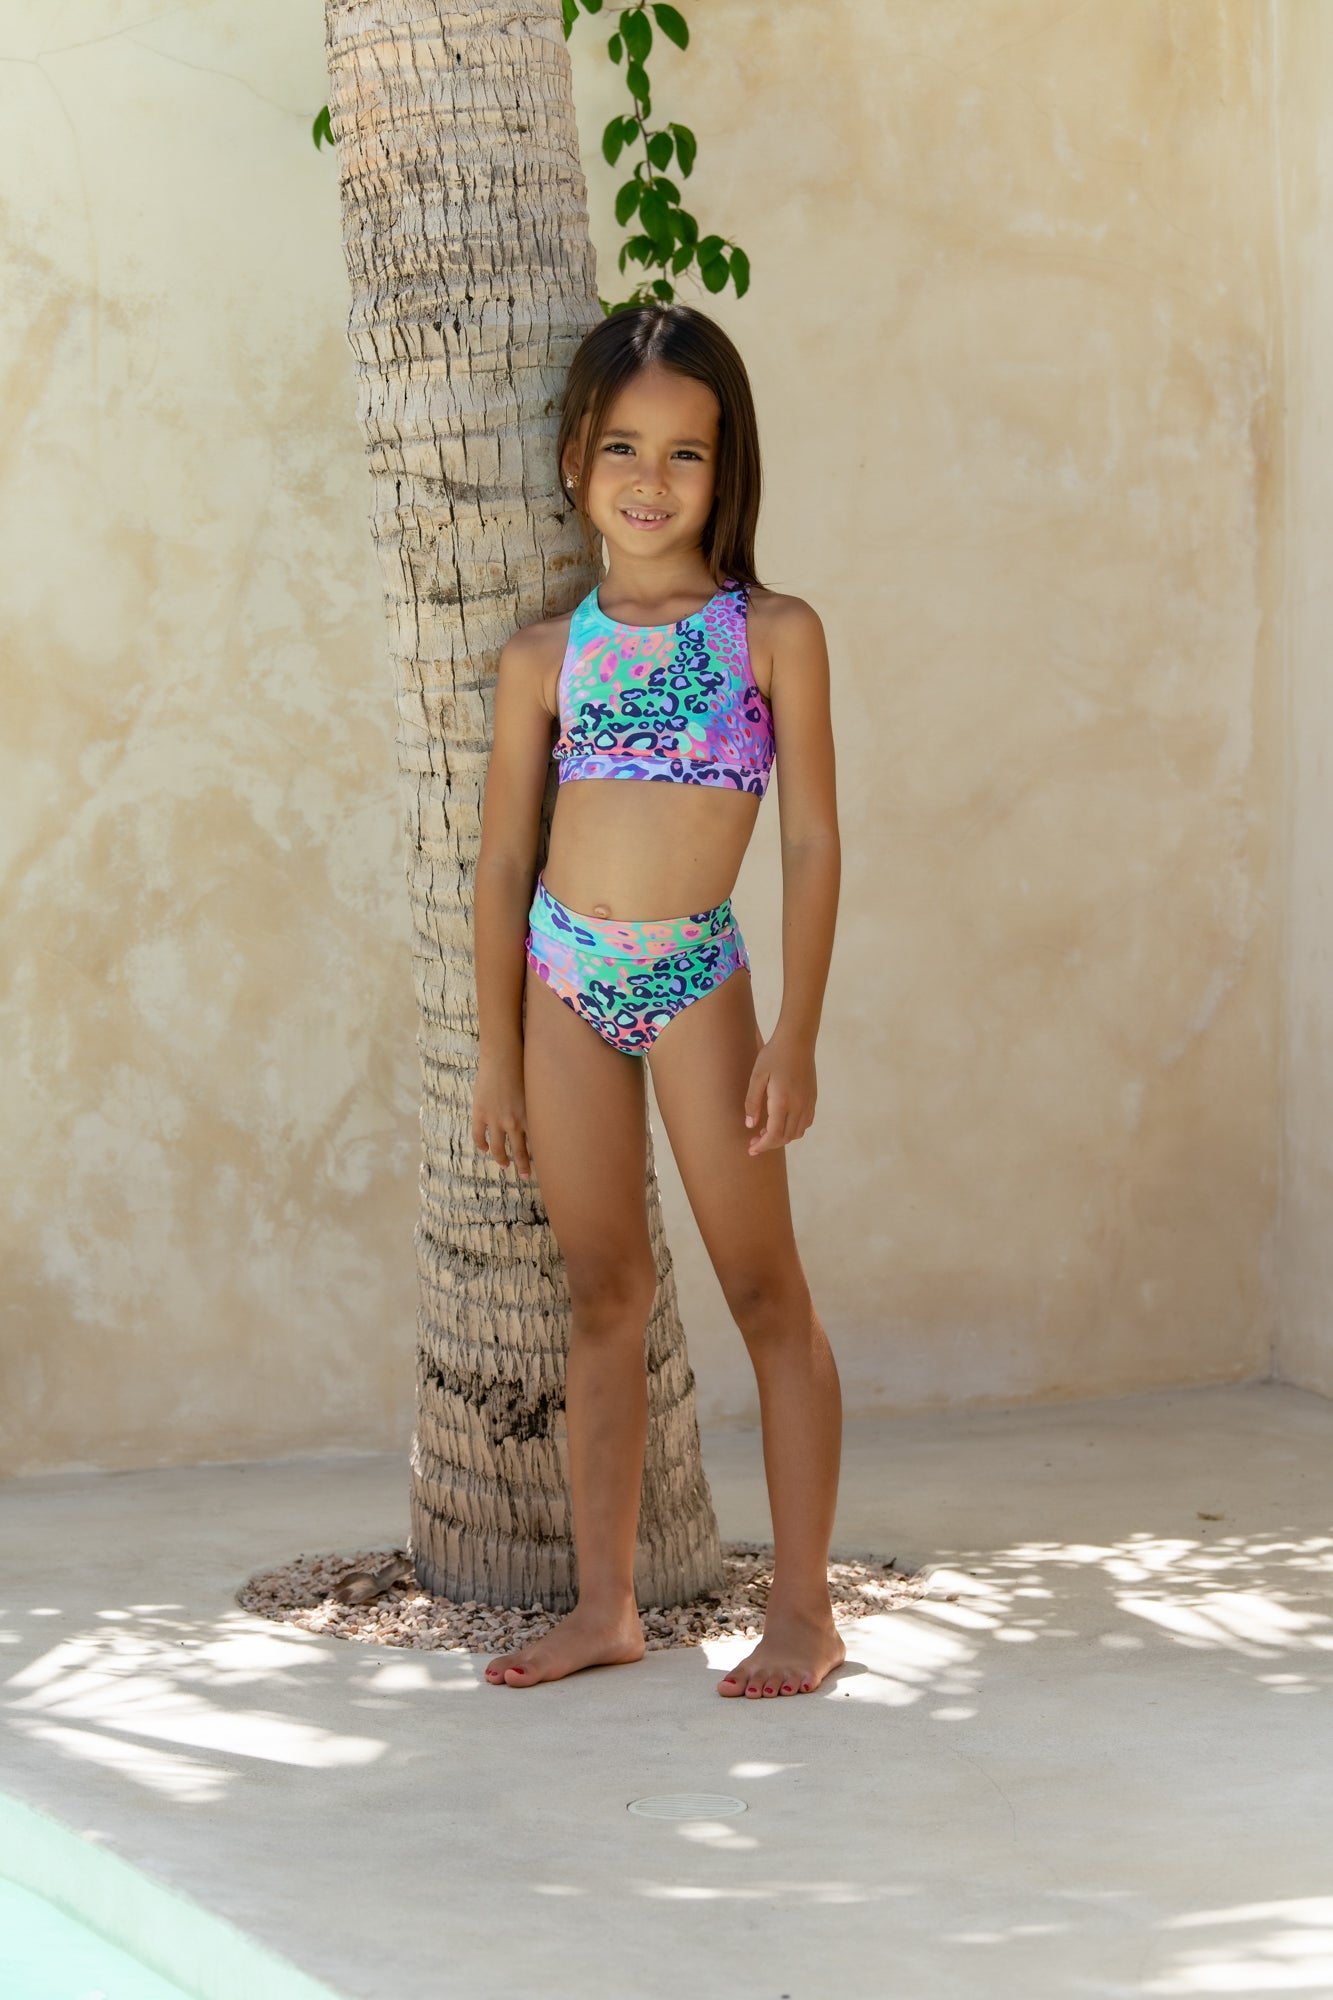 Women & Girl Swimsuits - Affordable High Quality - Coral Reef Swim